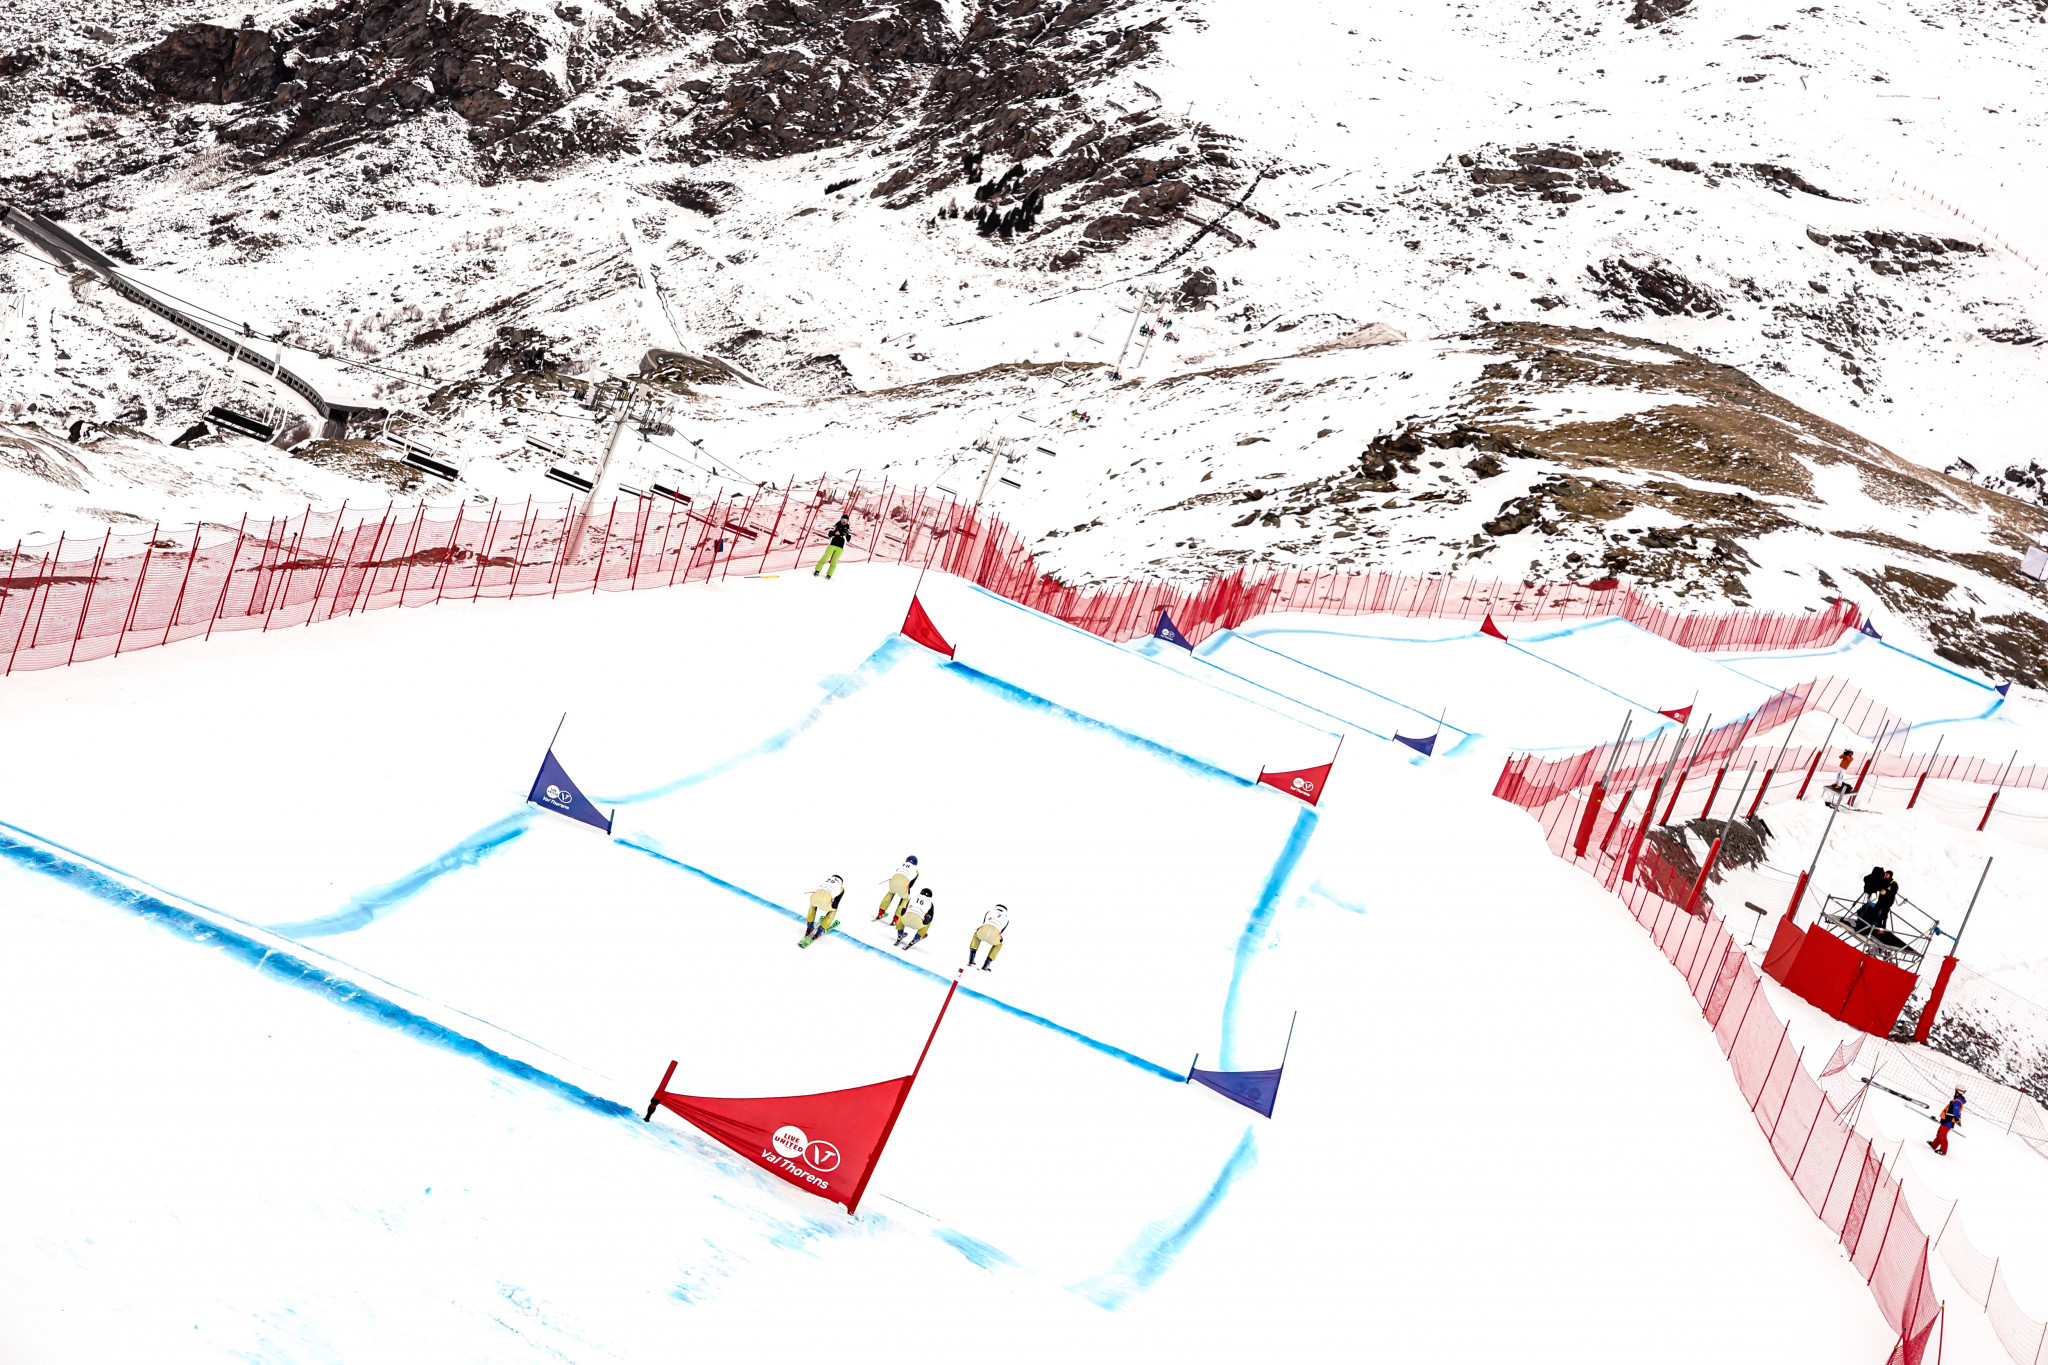 FIS Ski Cross World Cup circuit heads to the Alps for Val Thorens doubleheader